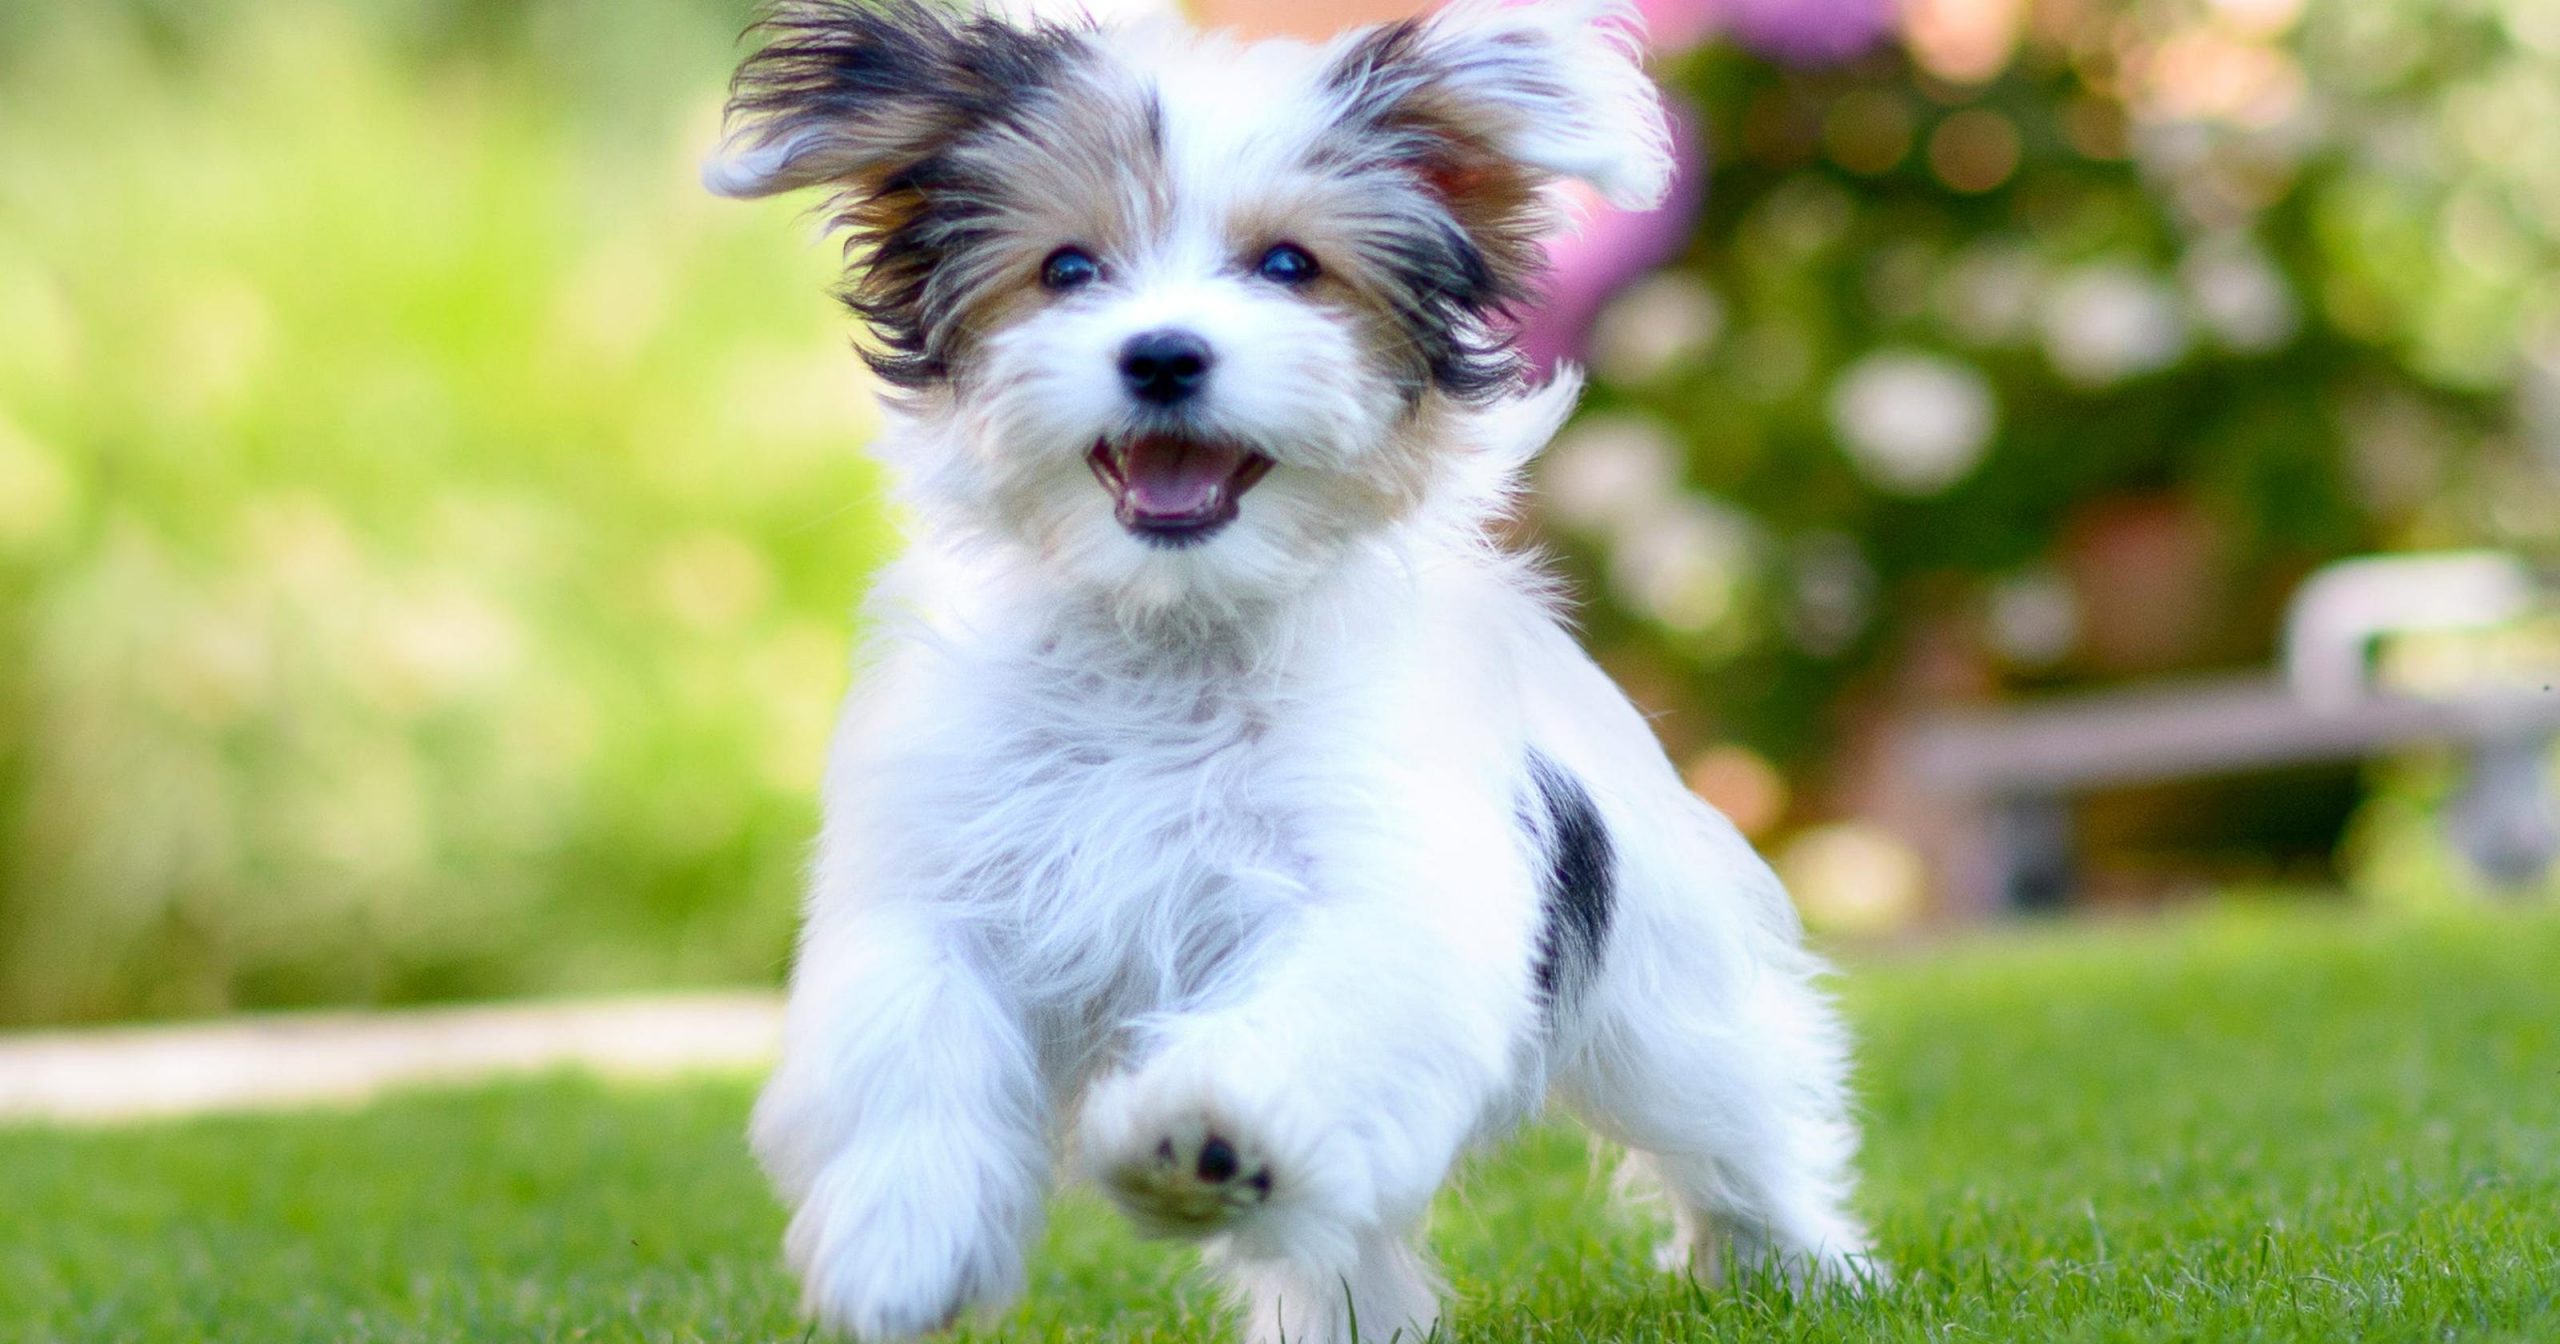 Most popular dog breeds in the United States